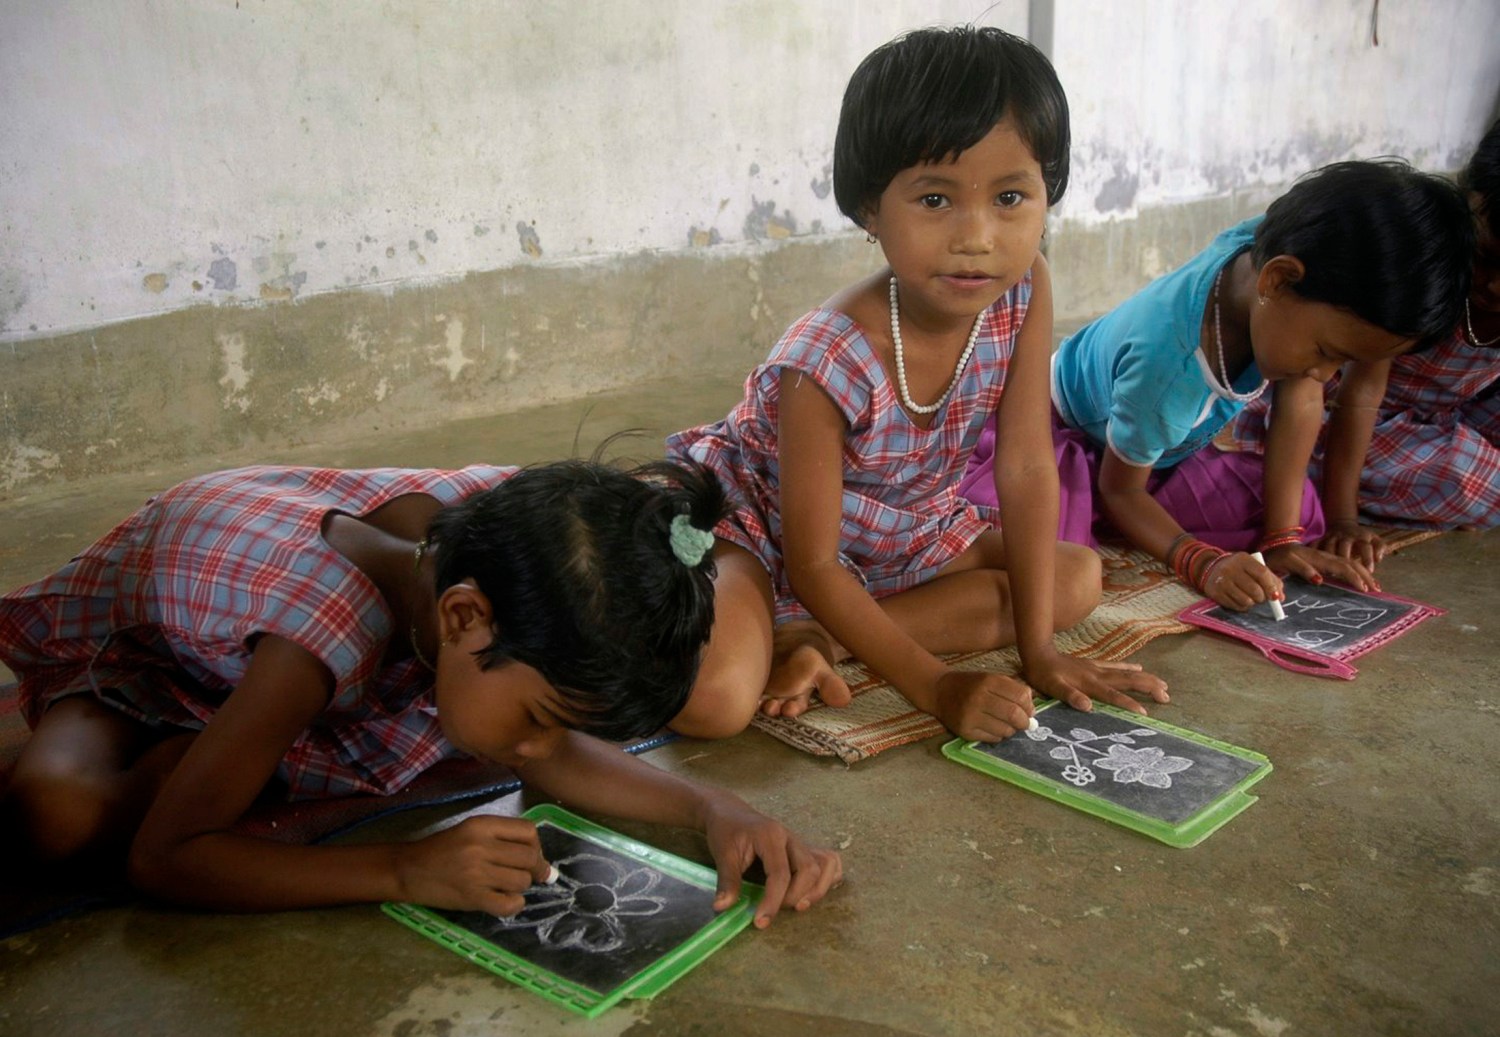 Children draw at an "anganwadi" (creche) centre under the Integrated Child Development Services (ICDS) scheme in Kutnabari village, about 45 km (28 miles) north of Agartala, capital of India's northeastern state of Tripura, August 9, 2008. The scheme aims to improve the nutritional and health status of children up to 6 years of age, pregnant women and nursing mothers from rural and tribal areas. The ICDS provides services like health check-up, immunization, pre-school education, supplementary nutrition amongst others. REUTERS/Jayanta Dey (JNDIA) - GM1E4891T1E01